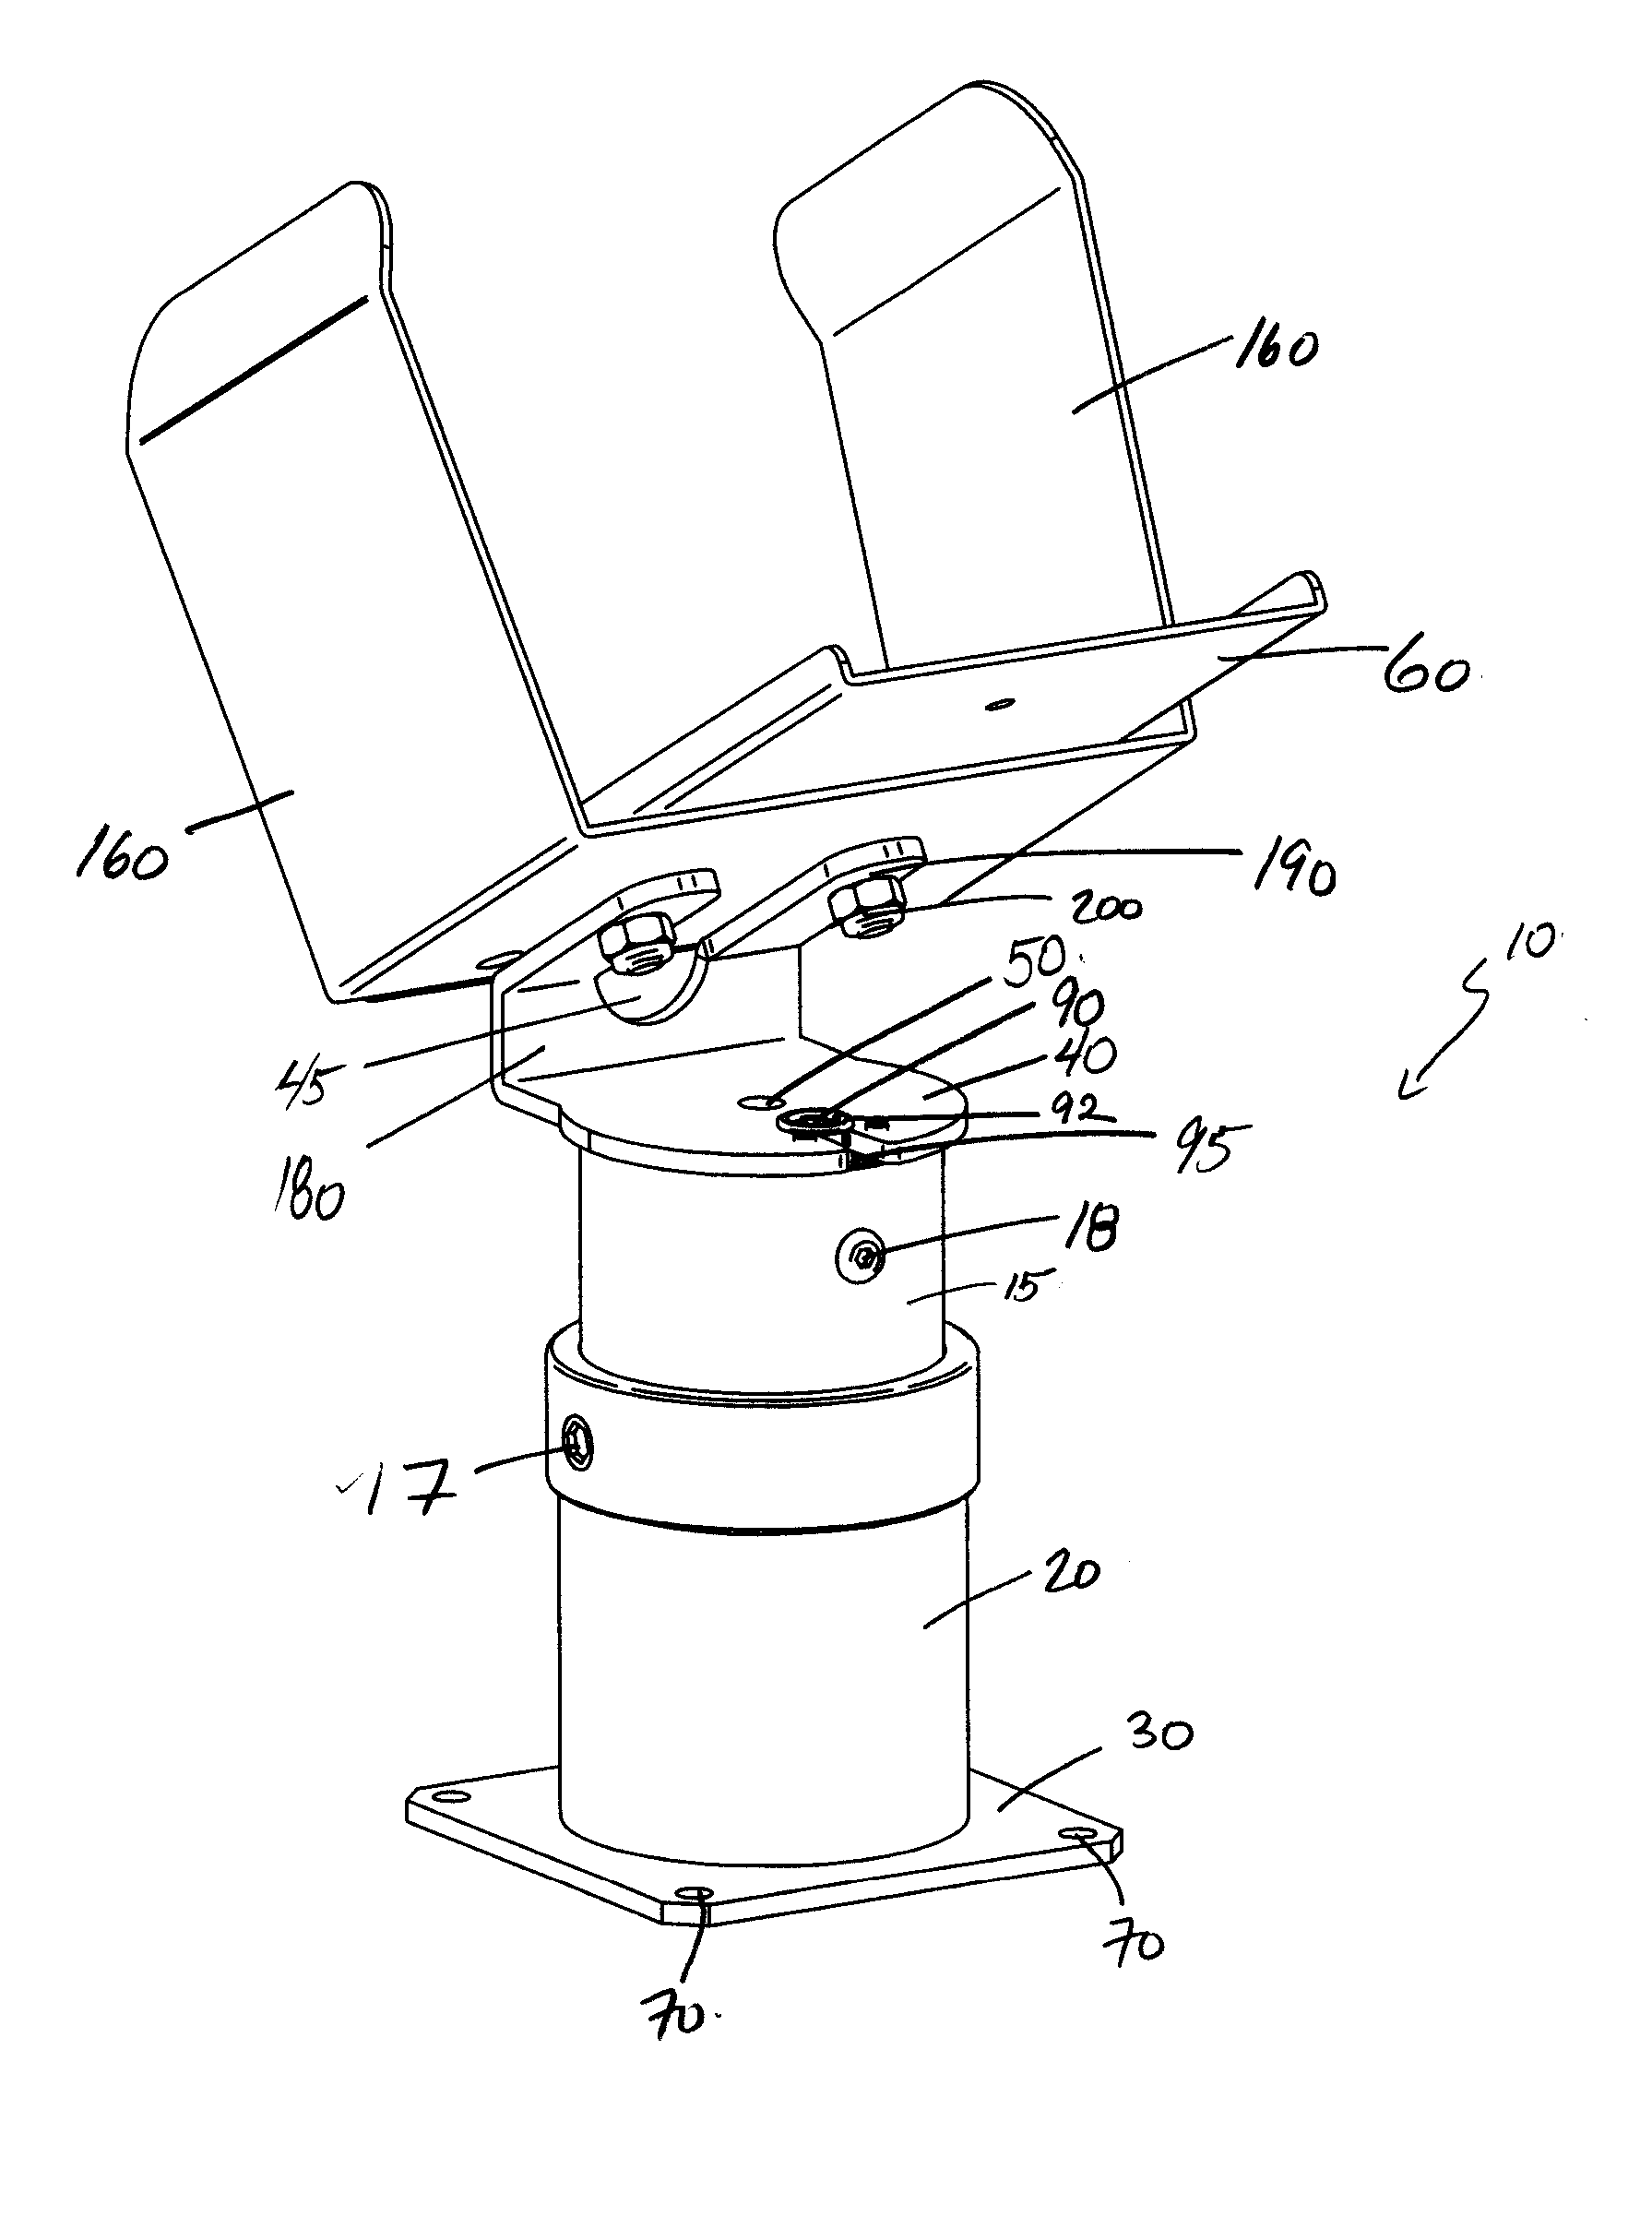 Information Transfer Device Support Stand